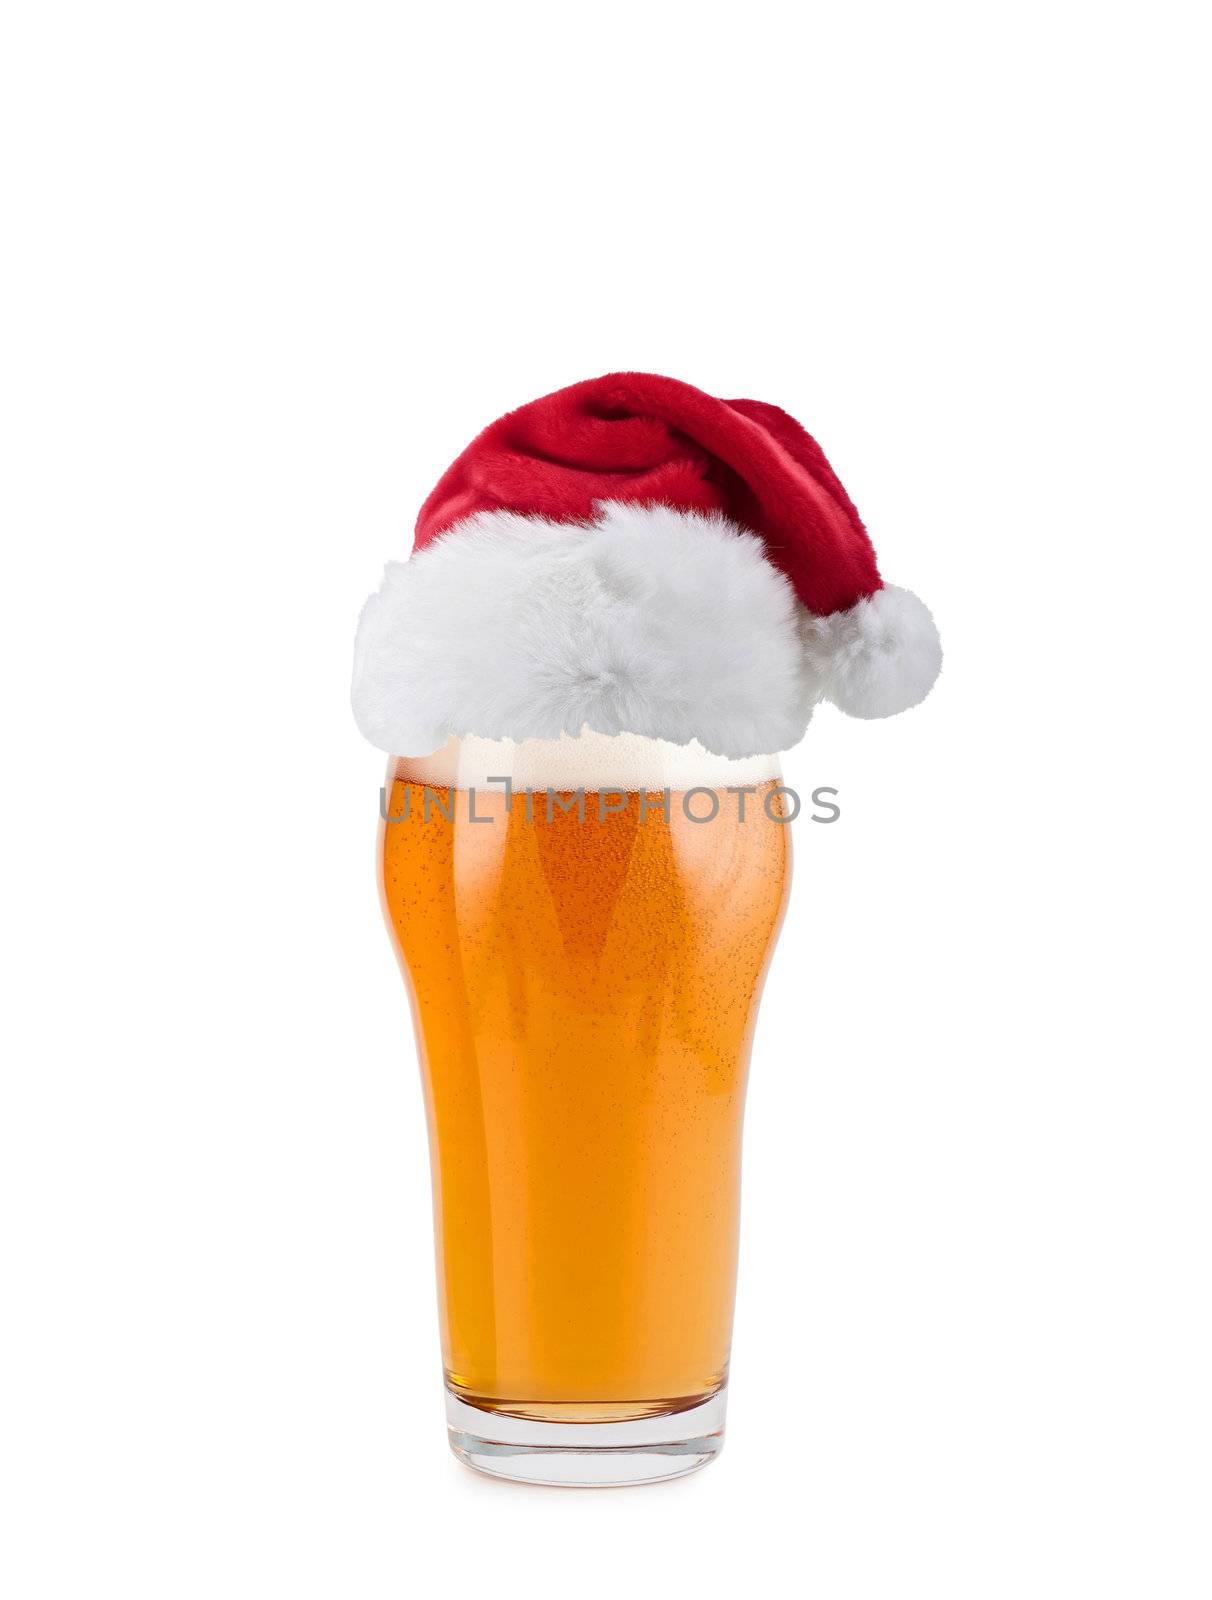 Santa Claus hat with beer by ozaiachin